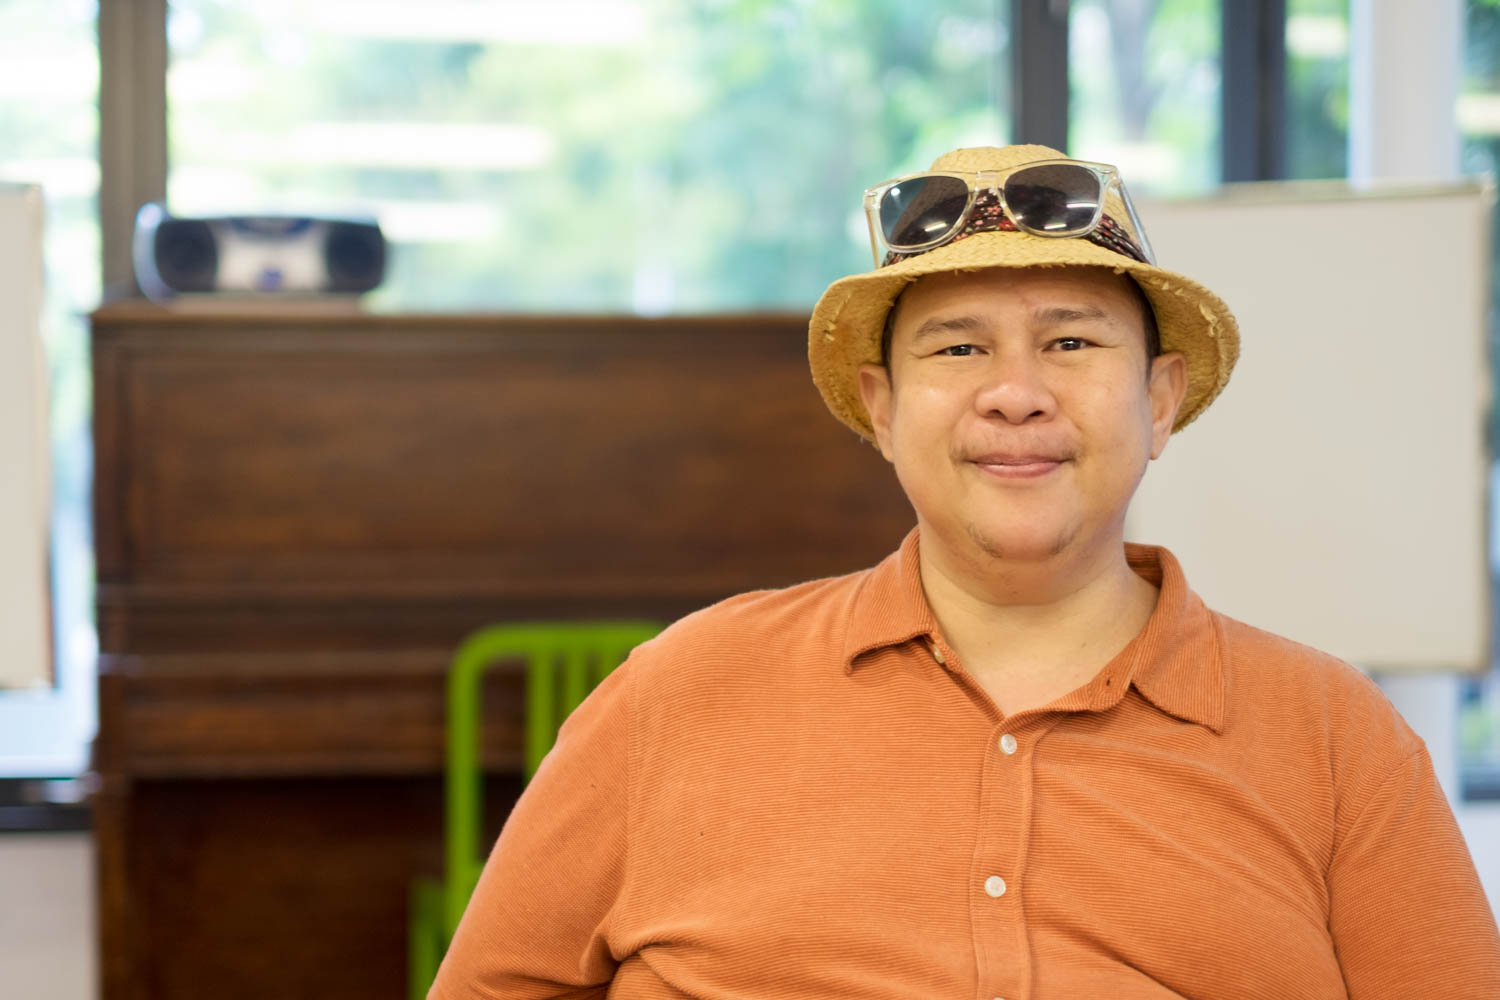 Lawrence sitting in a chair with a table in front, wearing an orange buttoned and collared shirt, a straw hat and black sunglasses propped up on the hat. Lawrence is looking at the camera and smiling. There is a blurred radio in the background.